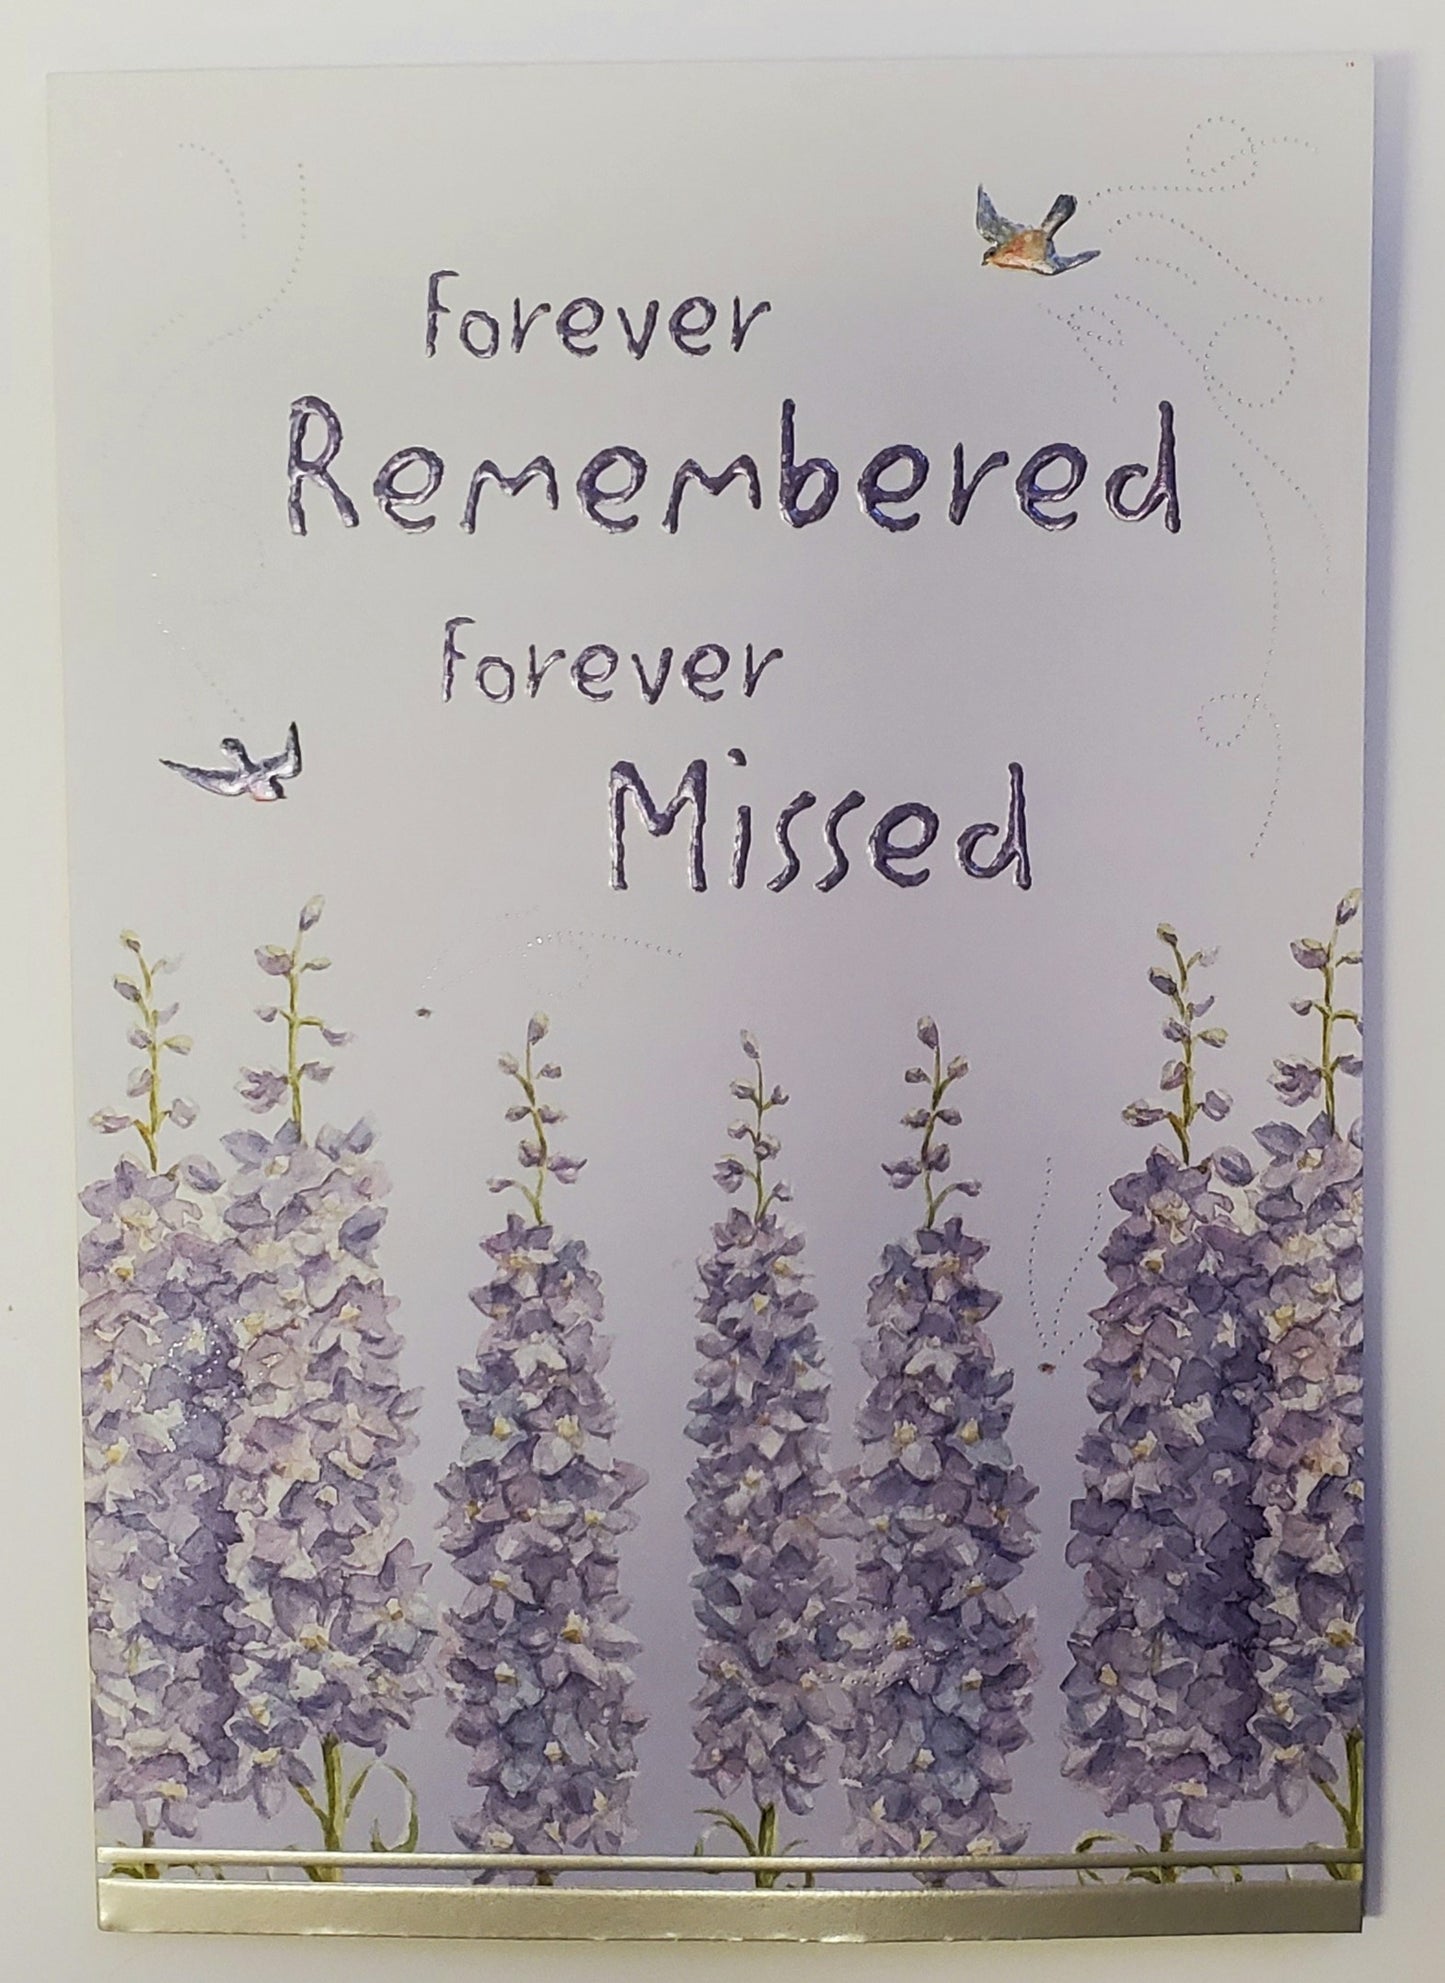 Soft lilacs- Sympathy greeting card. Retail: $3.99. Unit pack: 6. Inside: May your cherished memories bring you moments of comfort...